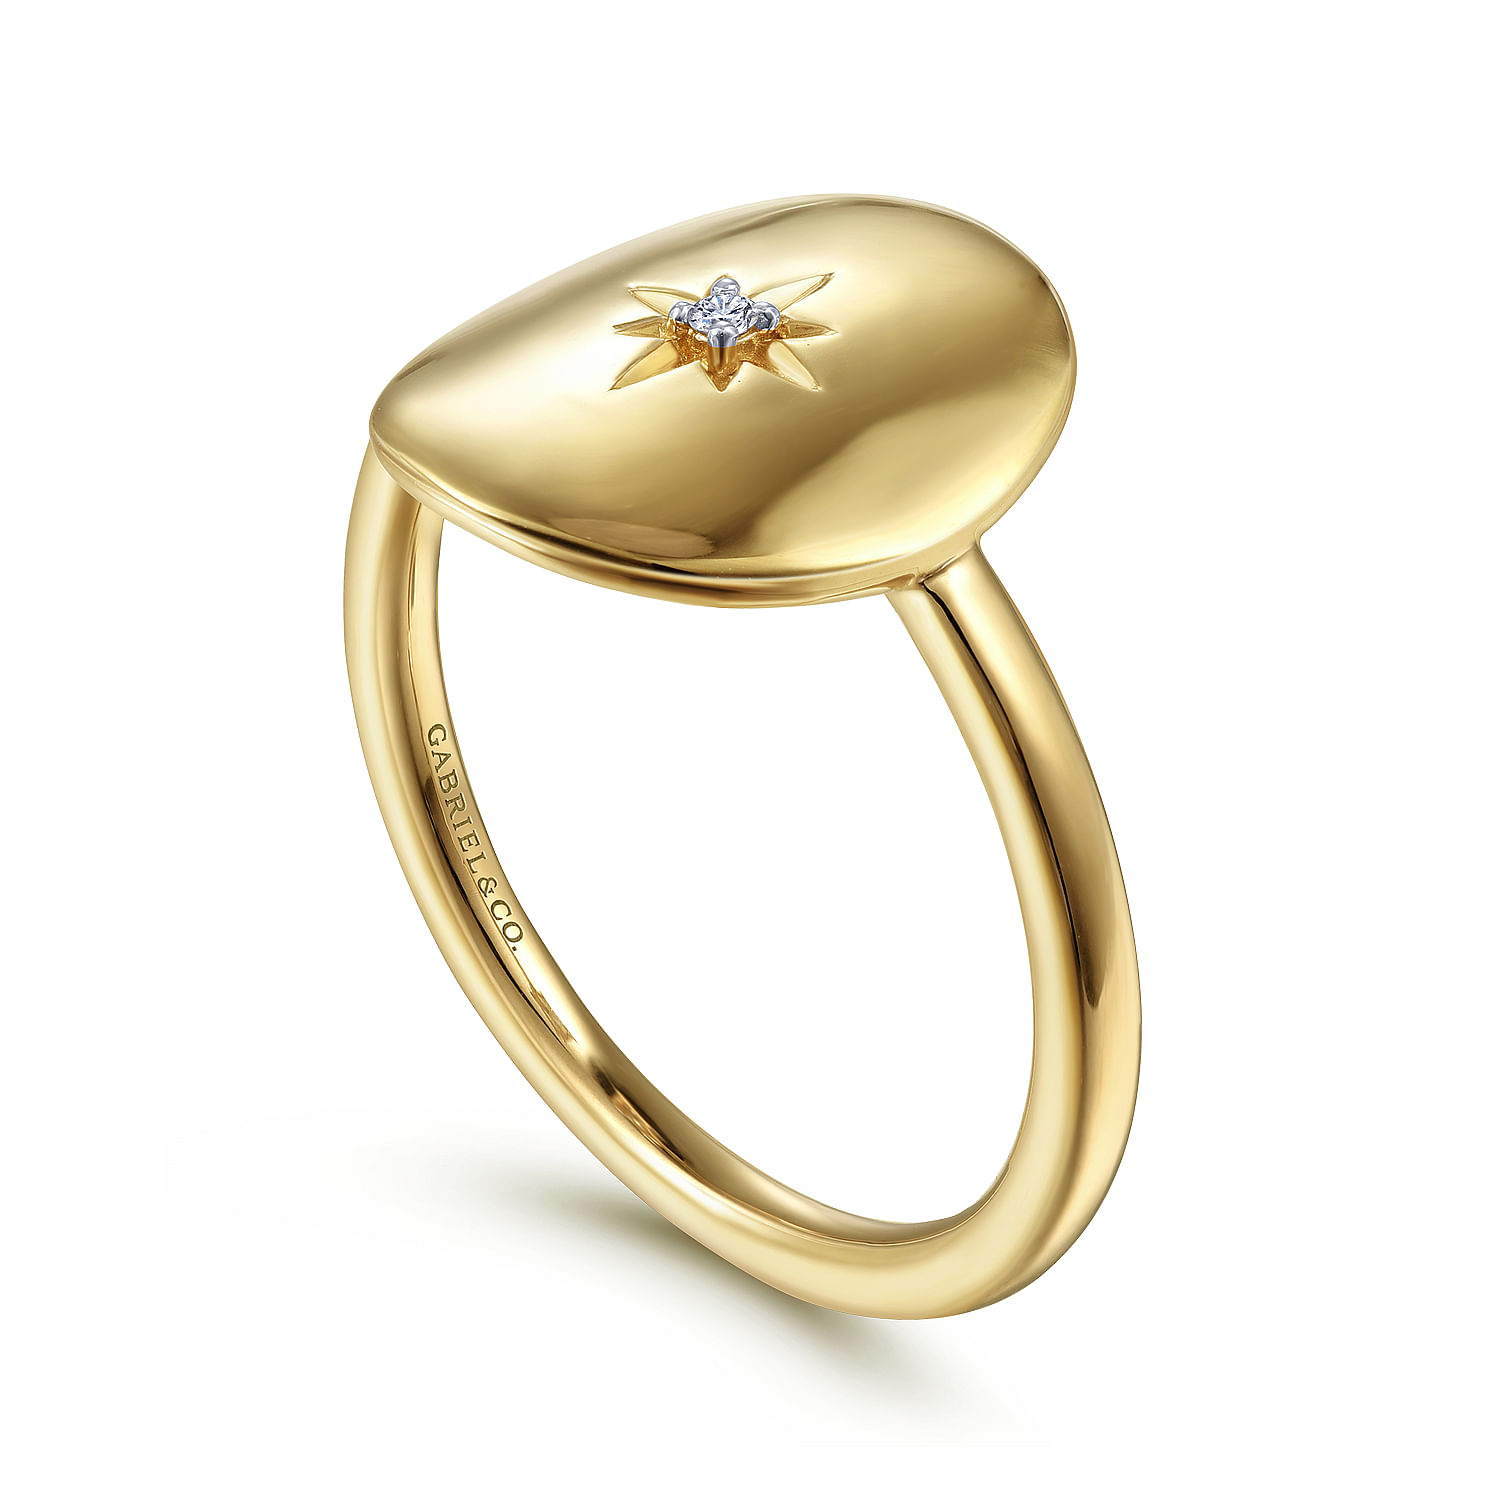 14K Yellow Gold Oval Medallion Ring with Diamond Star Center